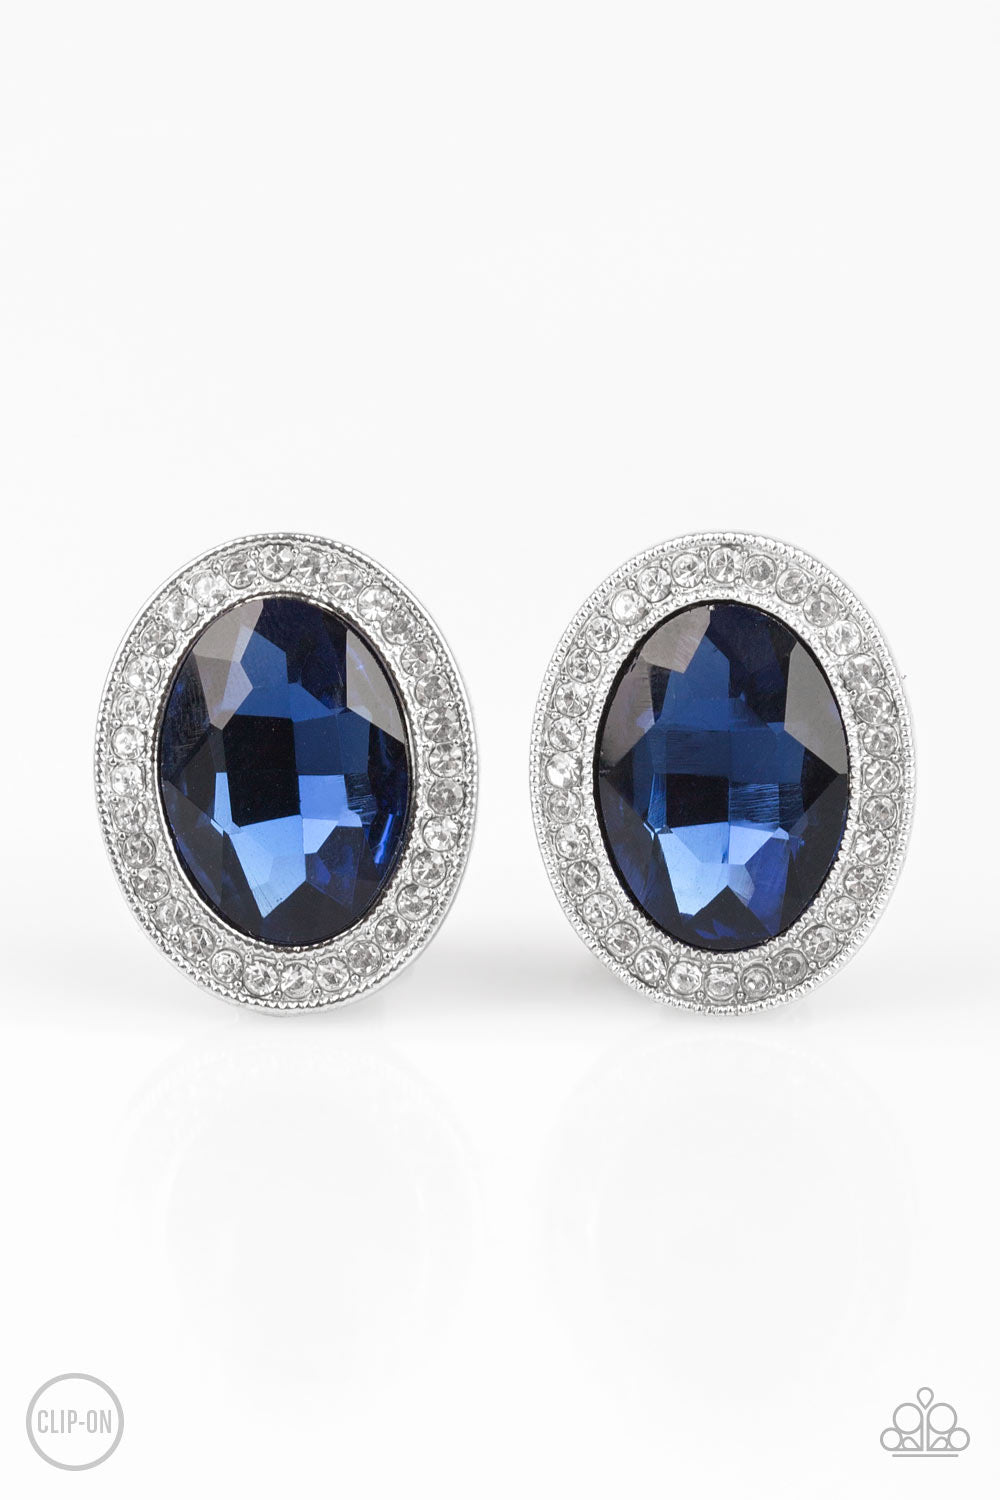 Only FAME In Town - Blue - Dazzling Diamonds 